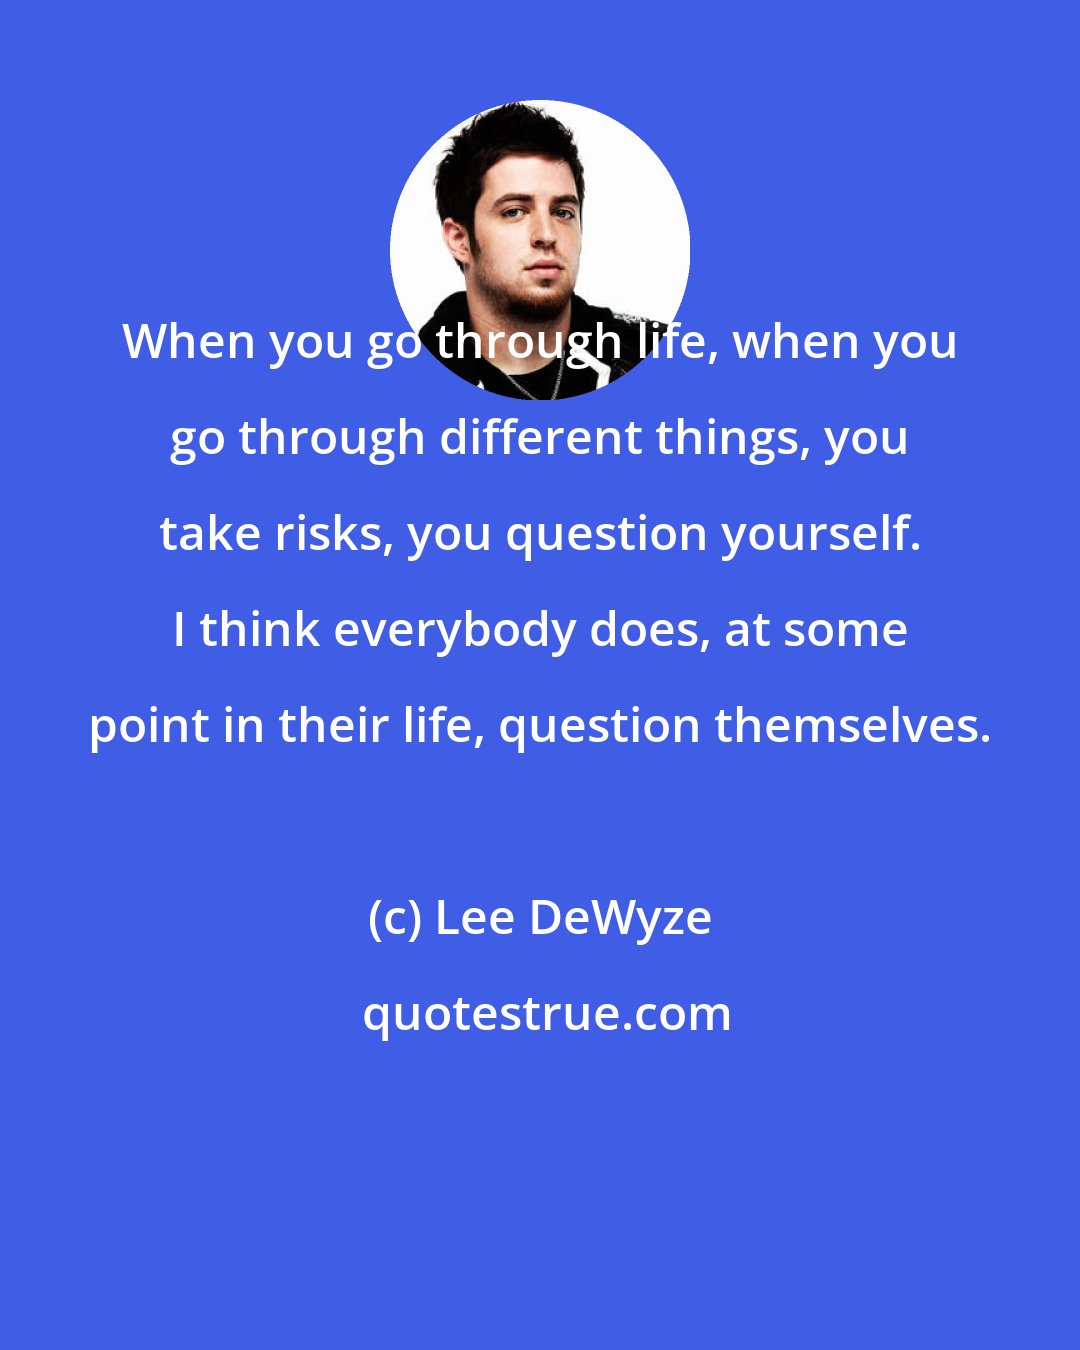 Lee DeWyze: When you go through life, when you go through different things, you take risks, you question yourself. I think everybody does, at some point in their life, question themselves.